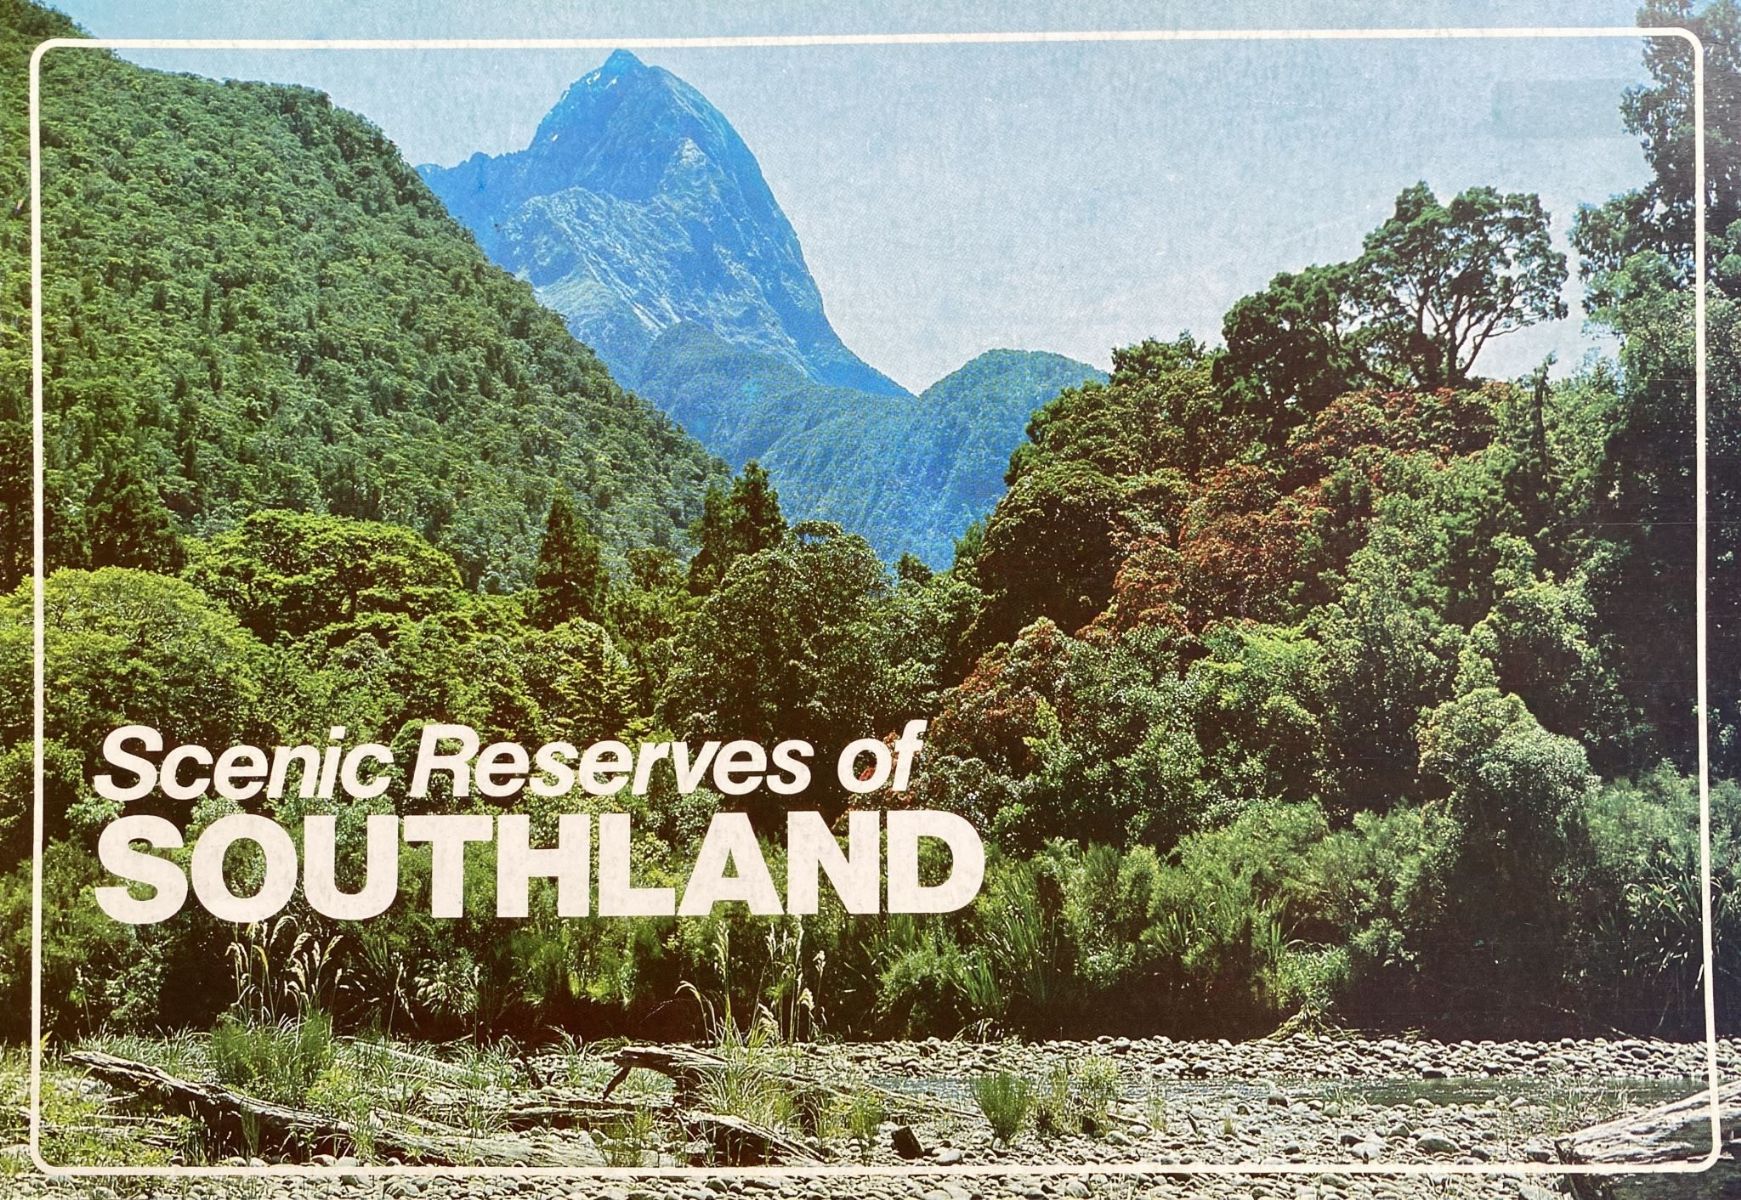 SCENIC RESERVES OF SOUTHLAND